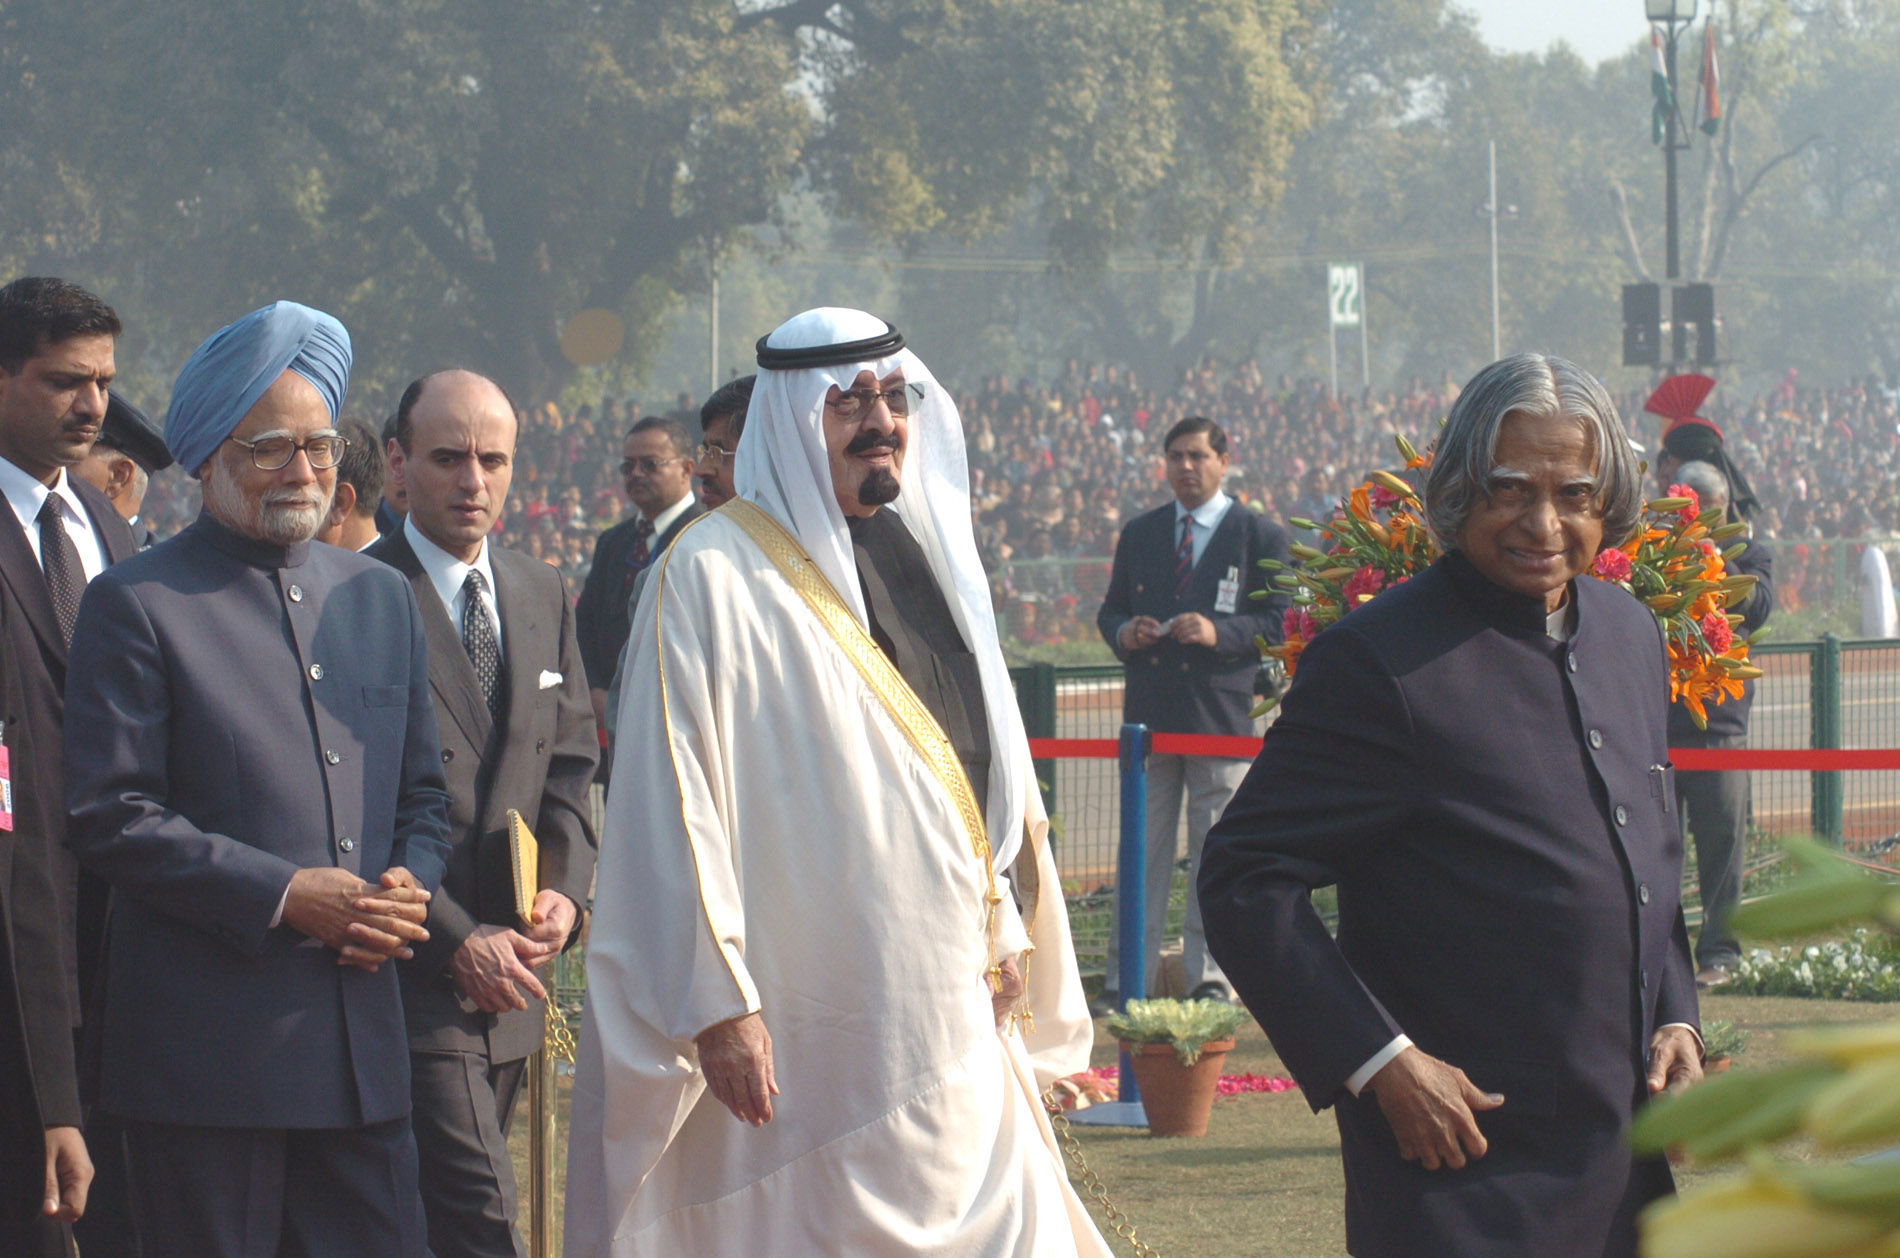 King Abdullah bin Abdulaziz al-Saud as the Chief Guest for the Republic Day celebrations in 2006, with former President A.P.J Abdul Kalam